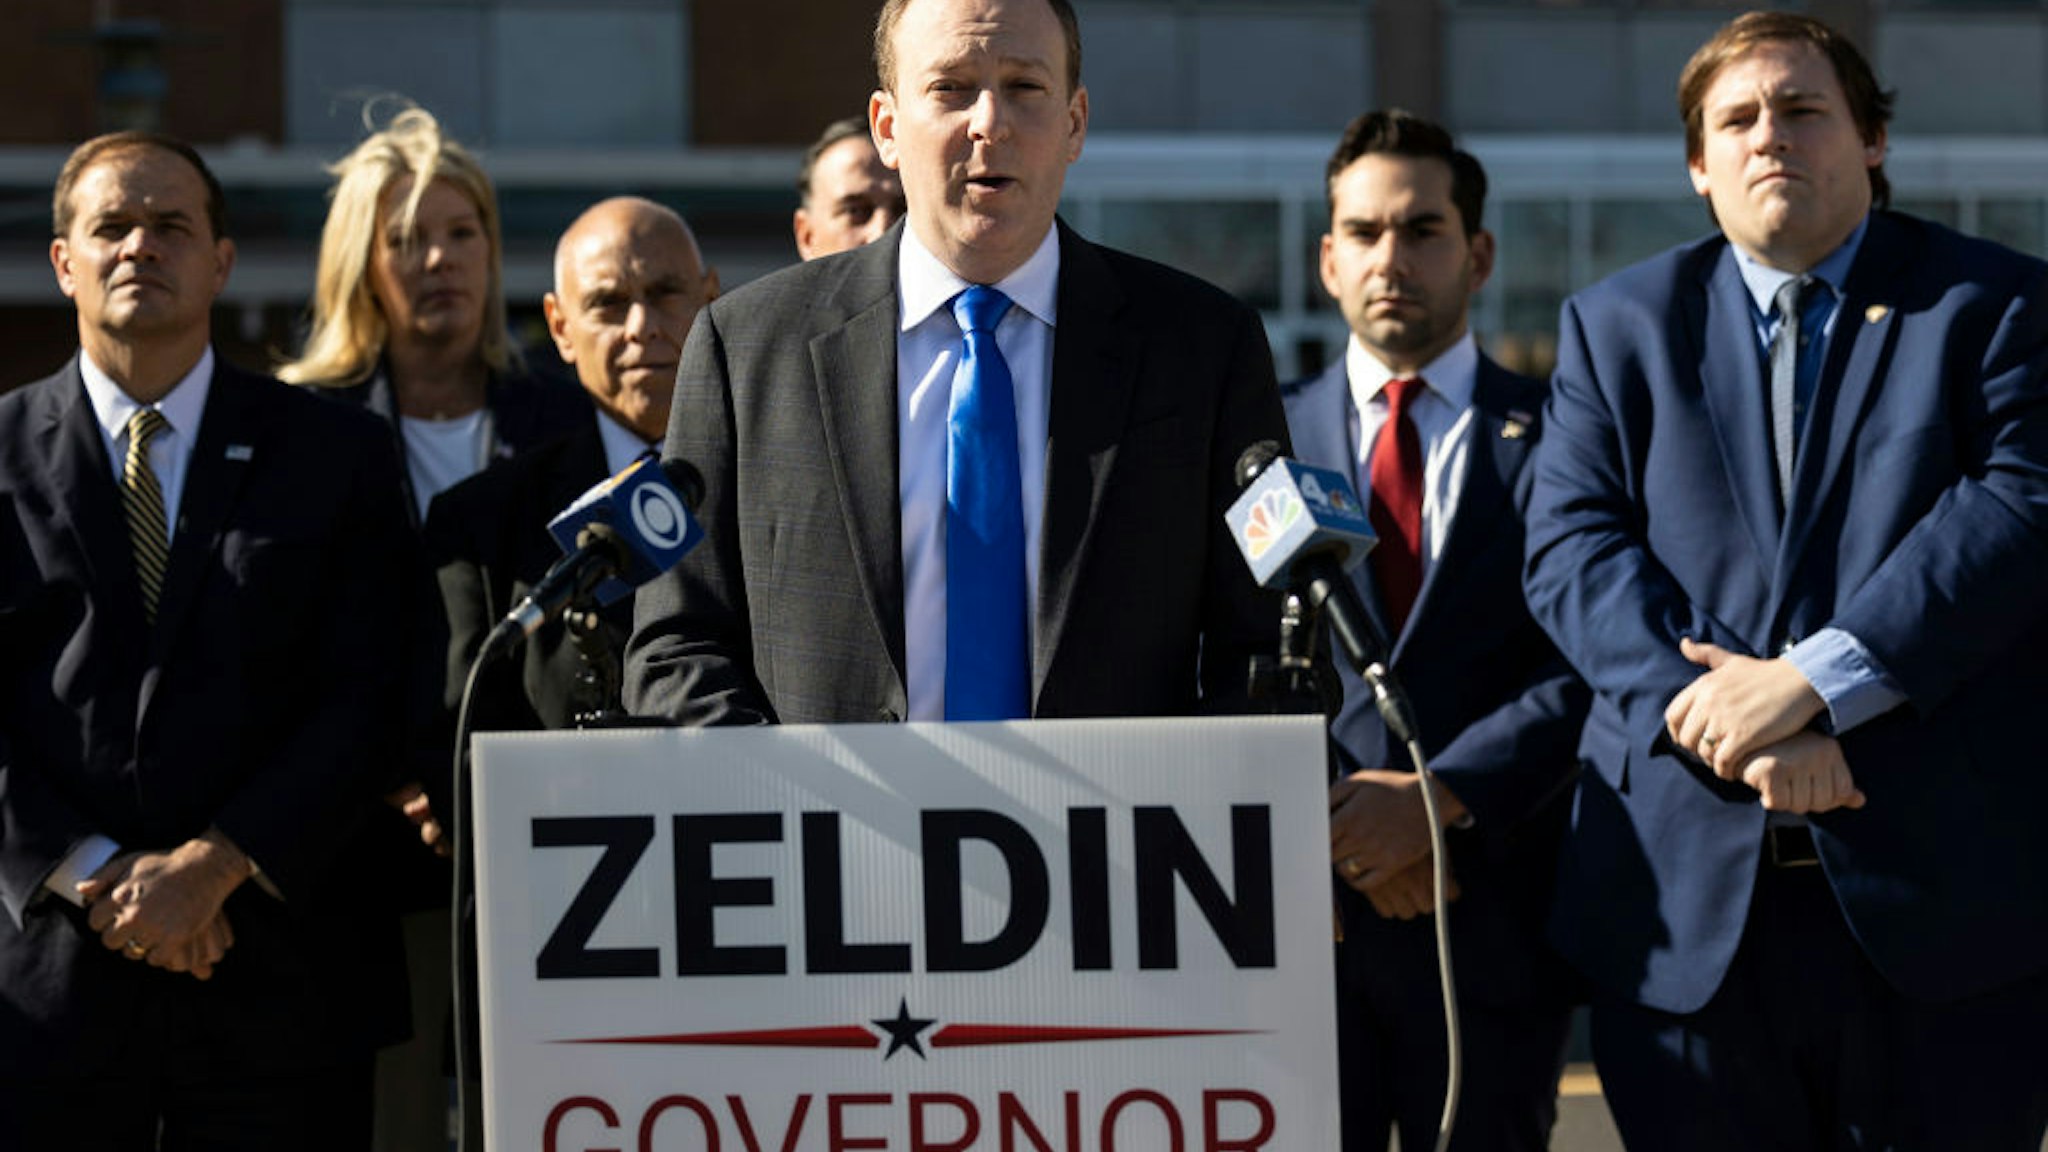 Central Islip, N.Y.: Congressman Lee Zeldin is joined by elected officials as they demand the demand a repeal of the cashless bail law on Nov. 10, 2021 in Central Islip, New York.